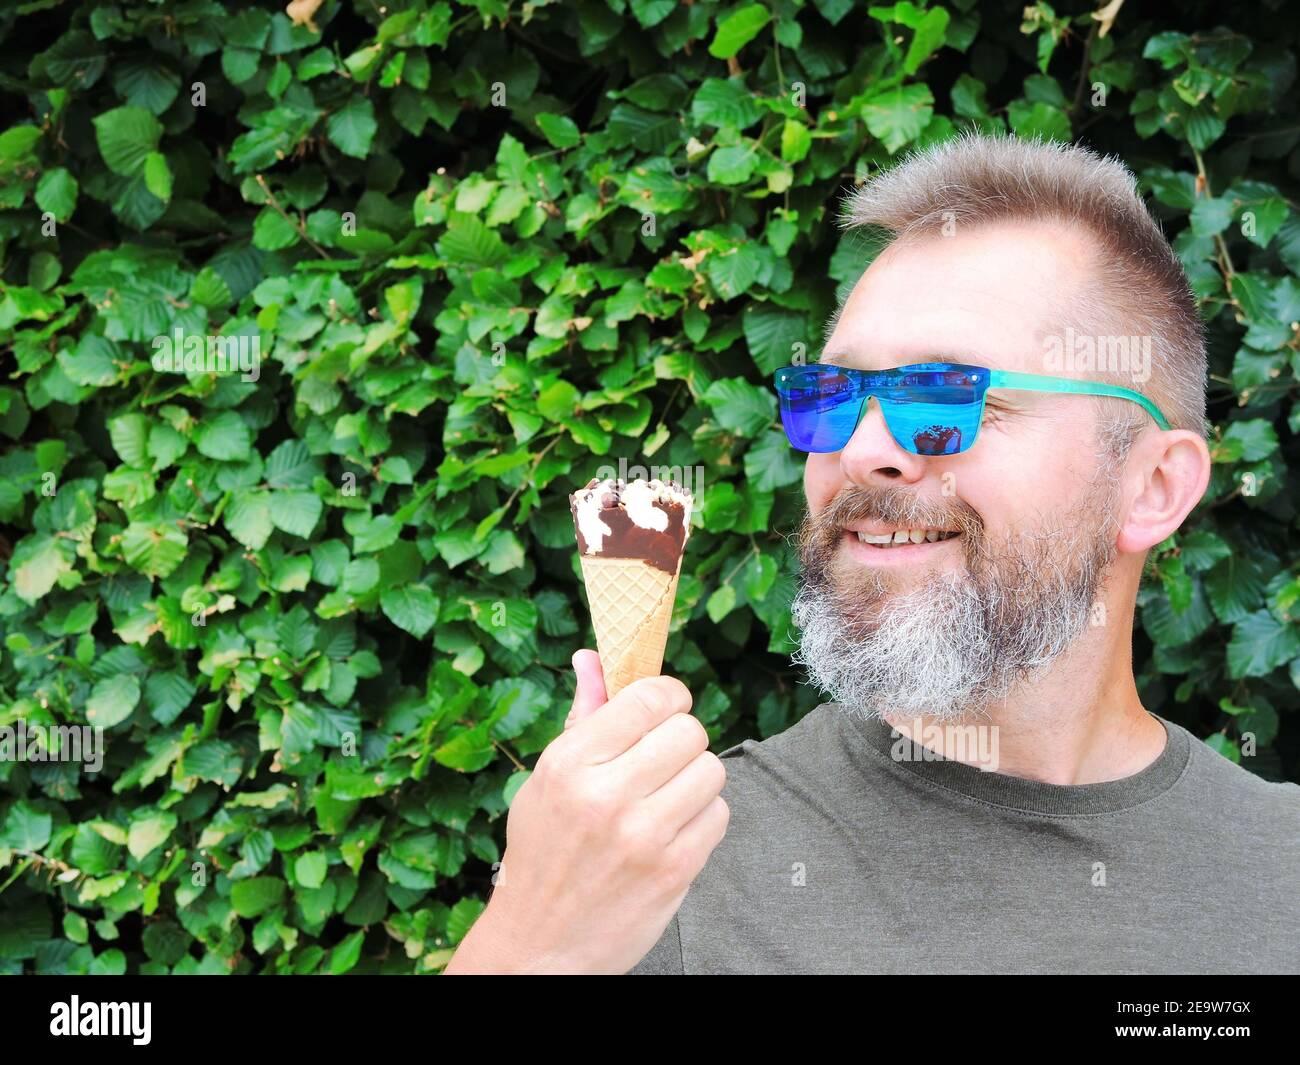 A handsome bearded man in sunglasses holds an ice cream cone in his hands and smiles Stock Photo